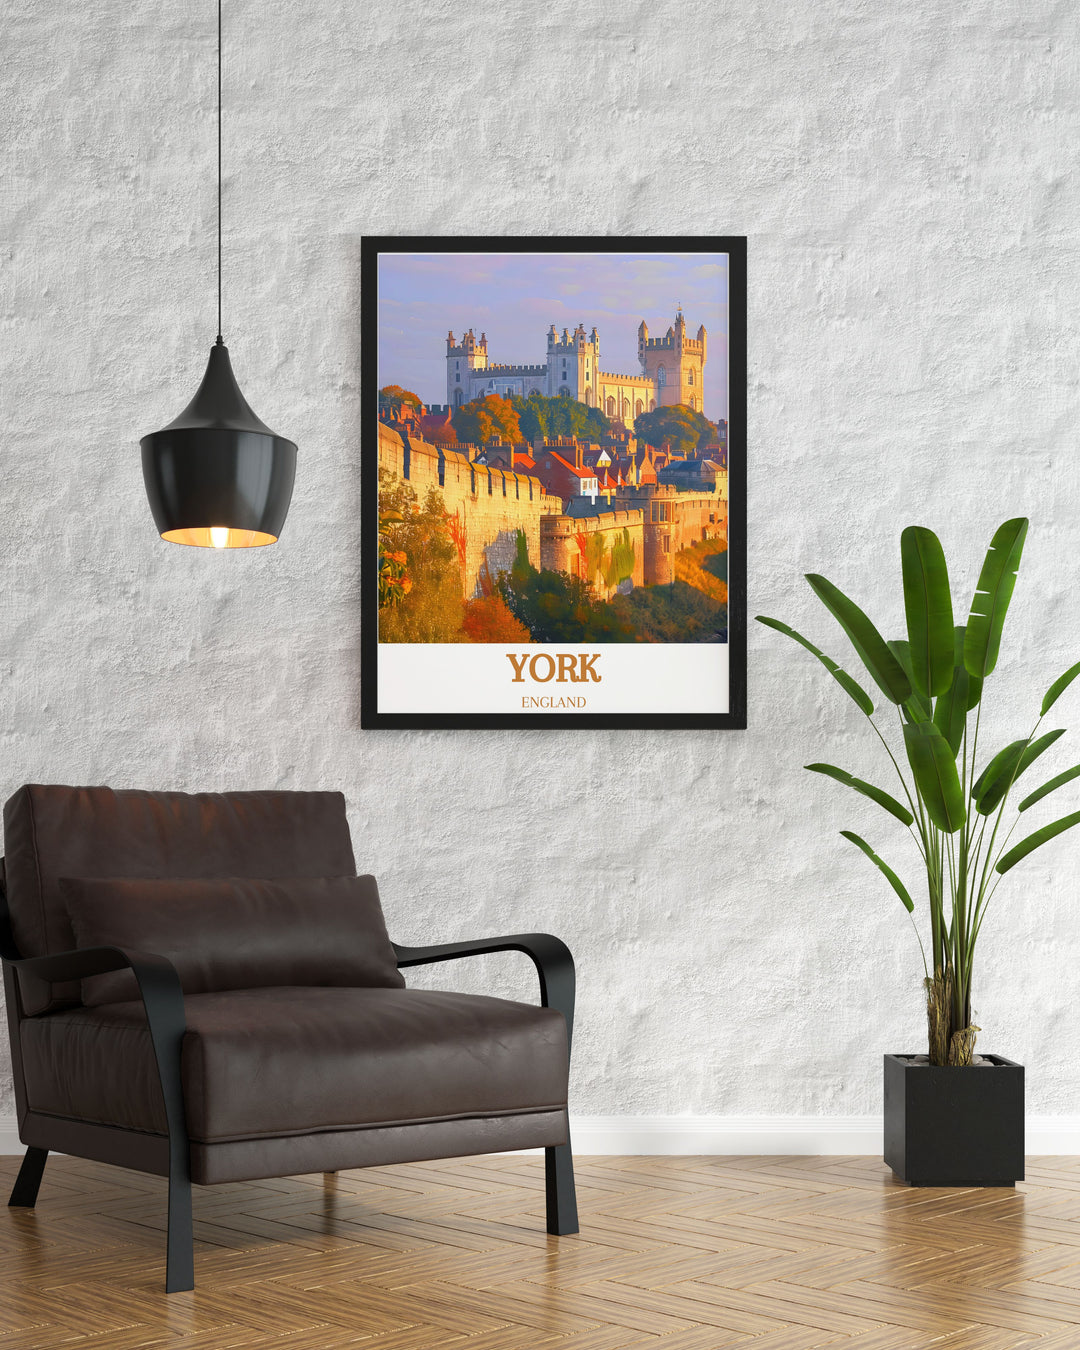 Vintage Travel Print of North York Moors highlighting serene landscapes and green valleys. Perfect for those who appreciate the natural beauty of Yorkshire. ENGLAND, york city walls adds a touch of historical significance.